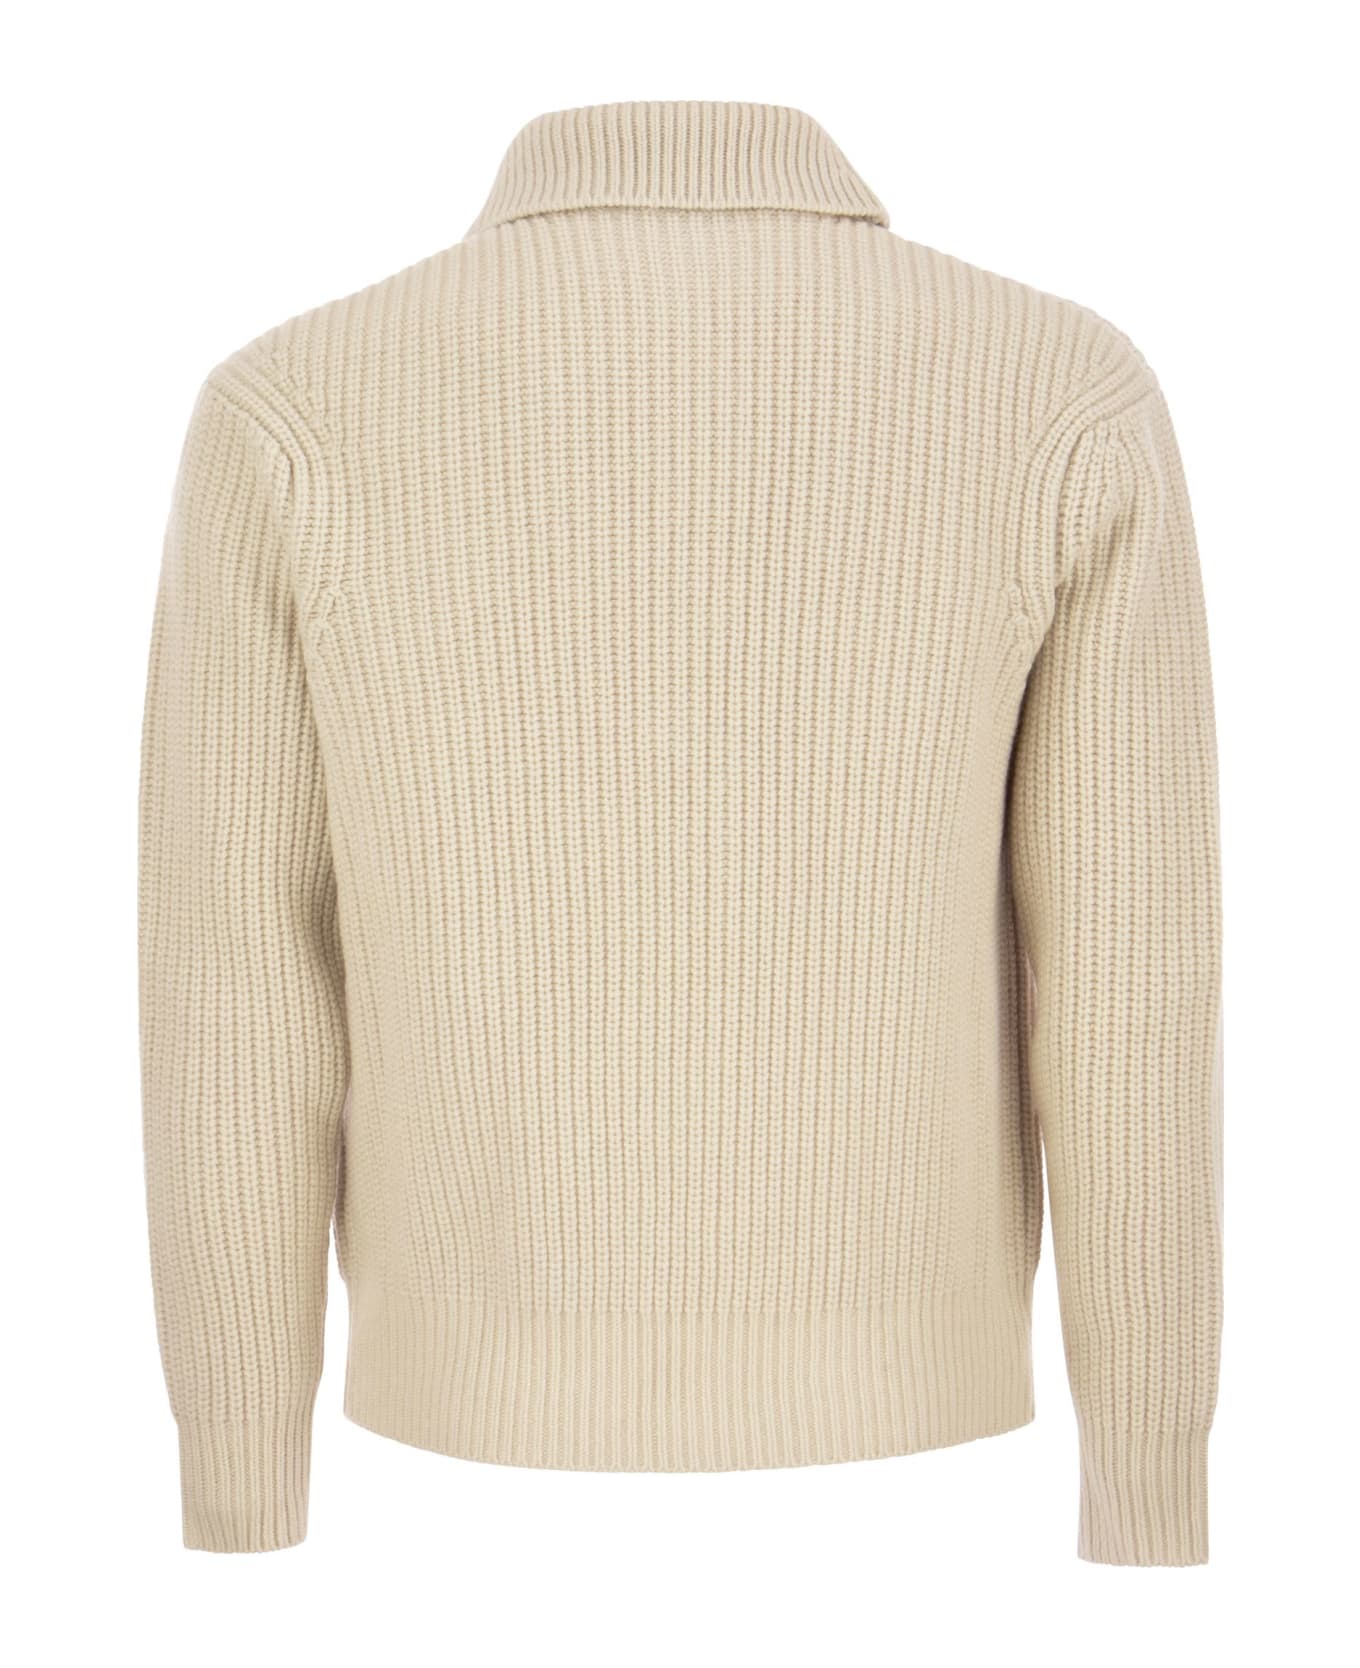 Peserico Wool And Cashmere Cardigan - Chalk